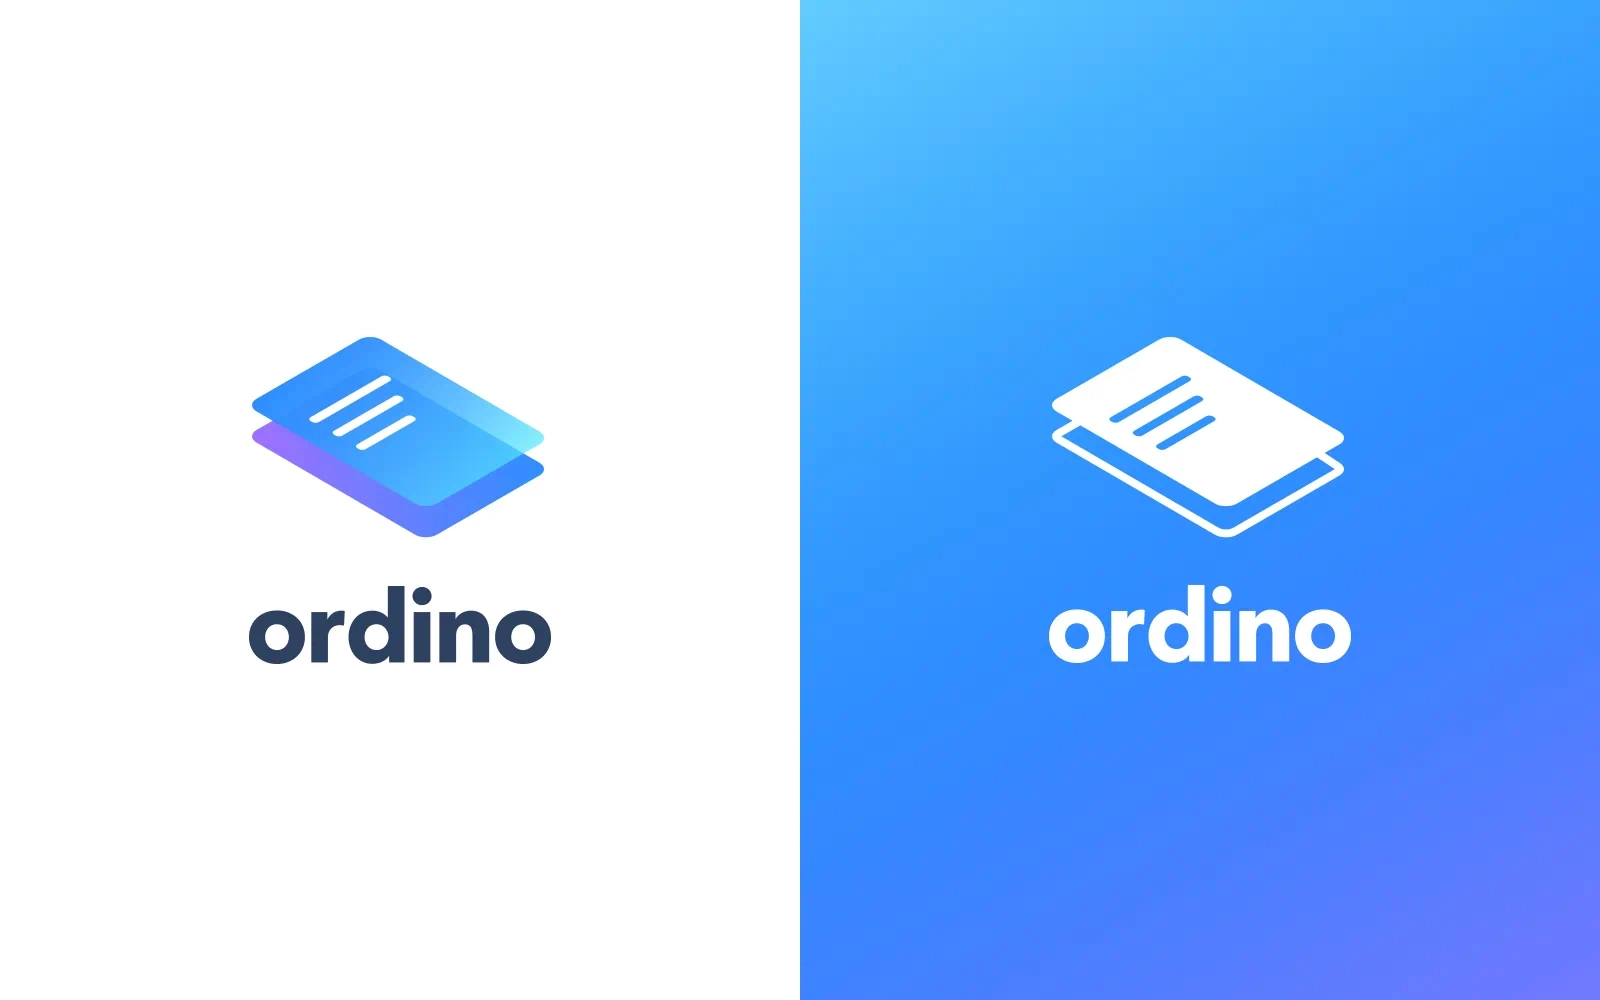 The Ordino logo split into two versions, one with the logo in blue and purple on a white background, the other is white on a blue and purple background